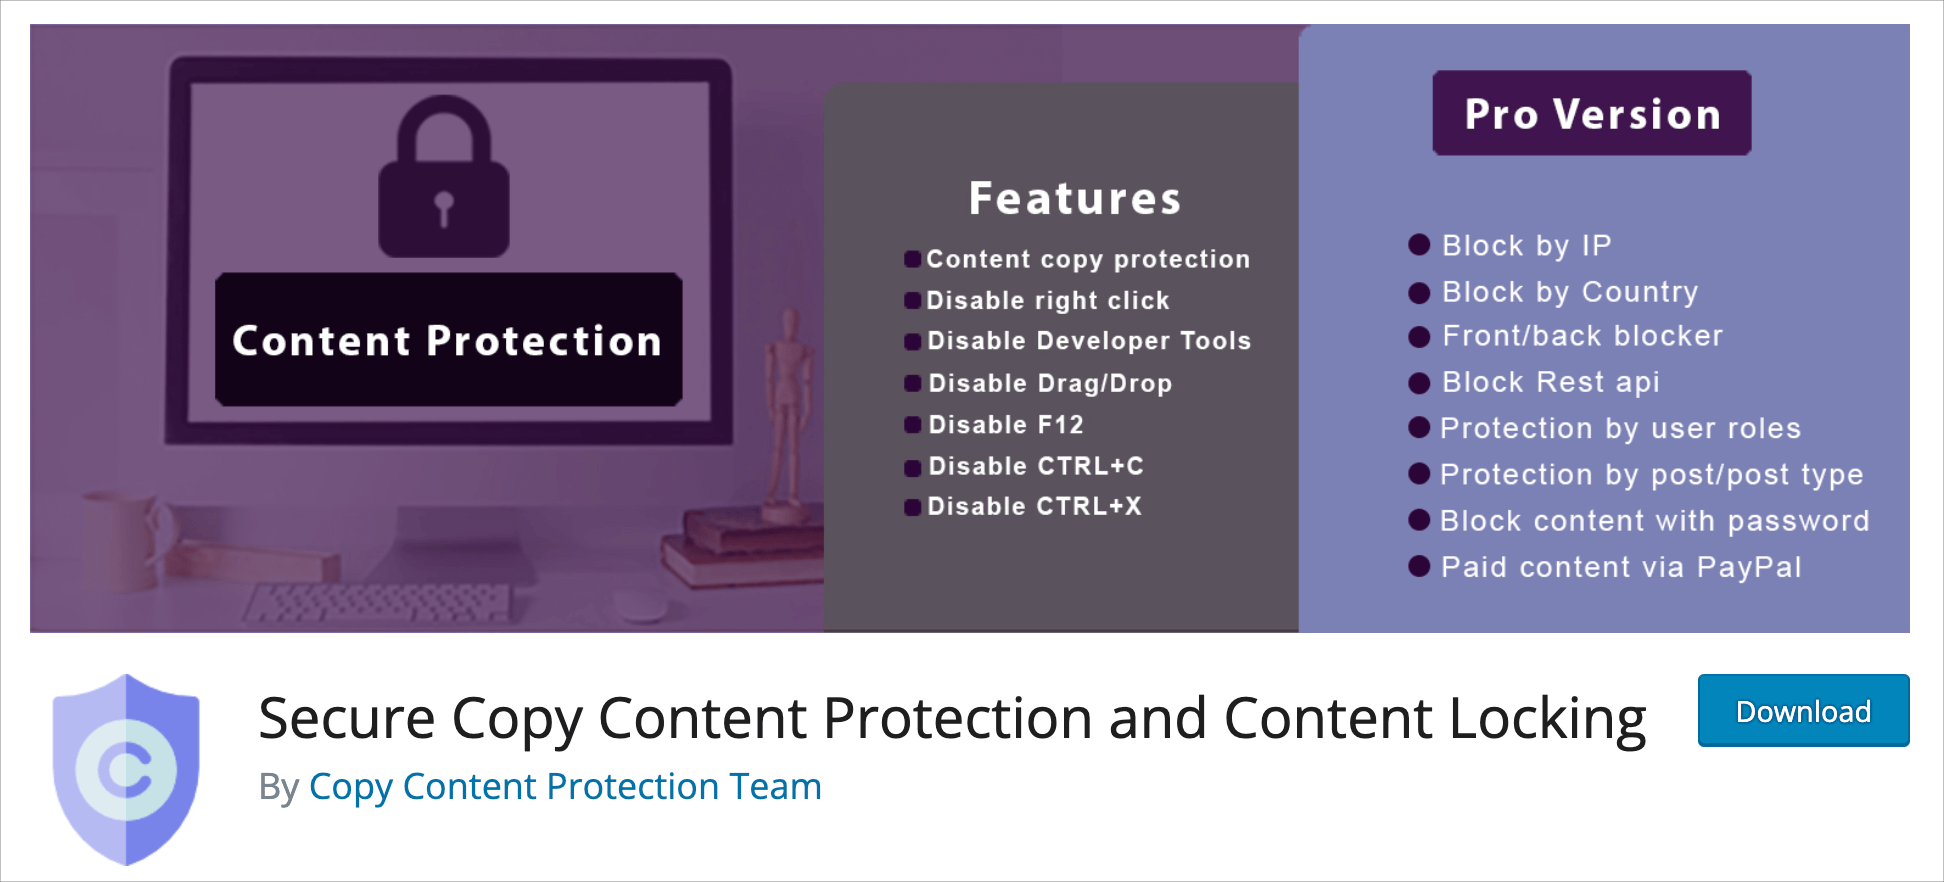 Secure Copy Content Protection and Content Locking
